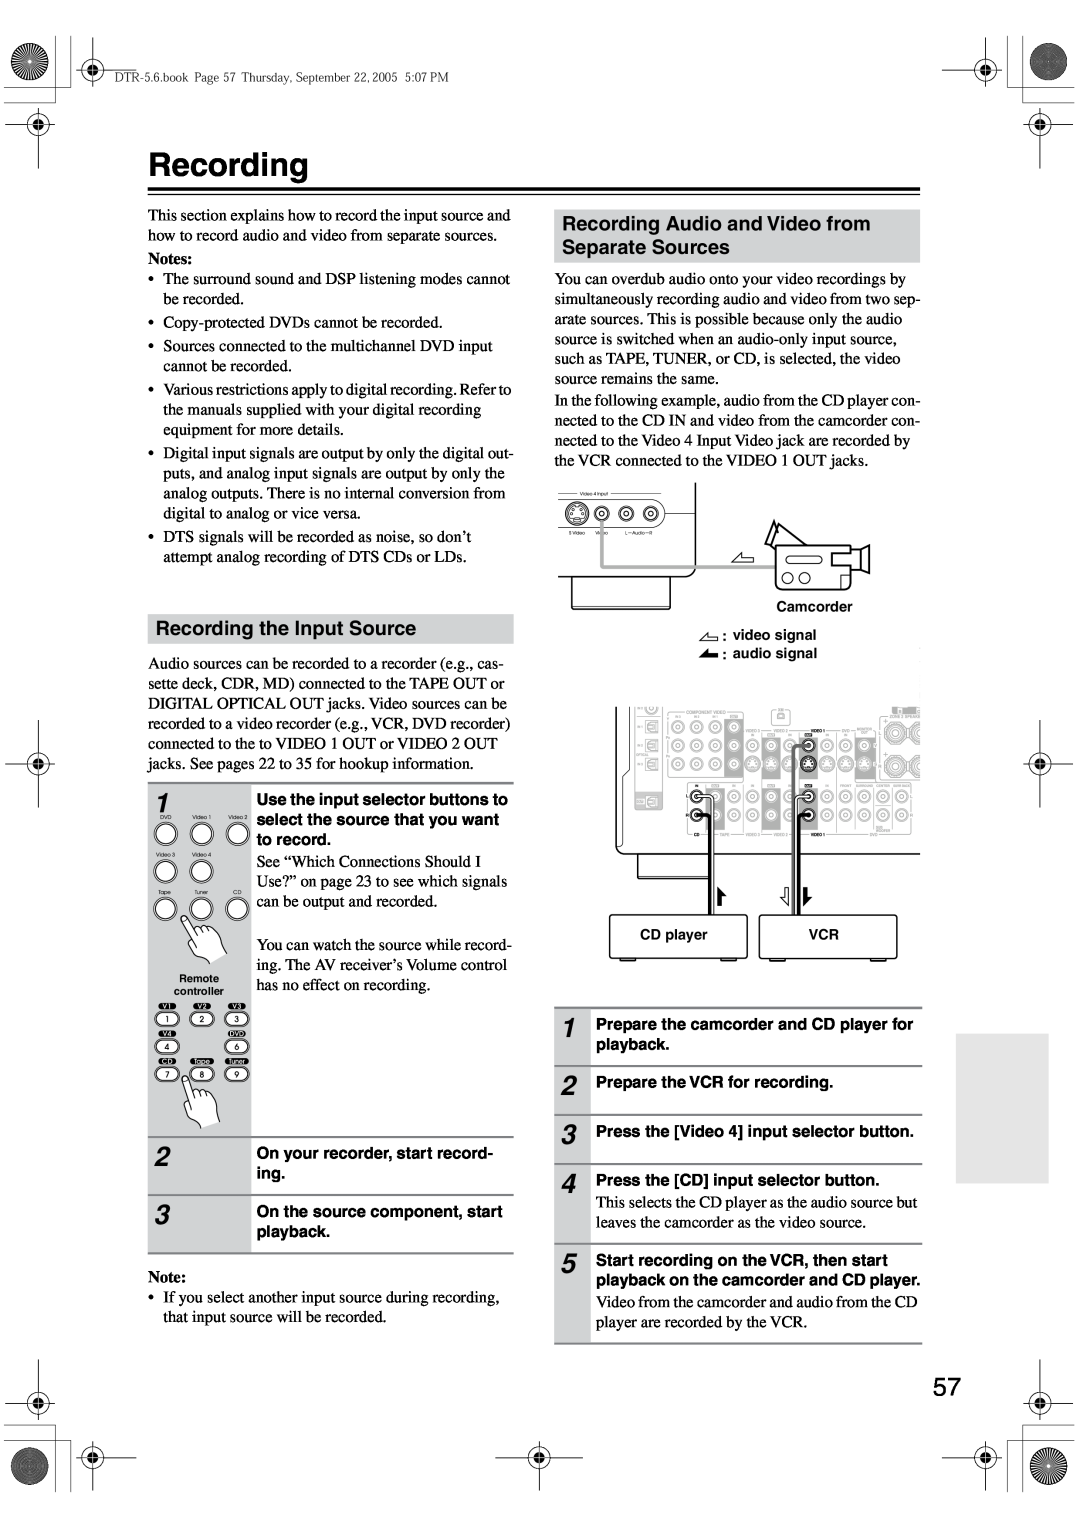 Integra DTR-5.6 instruction manual Recording Audio and Video from Separate Sources, Recording the Input Source, Notes 